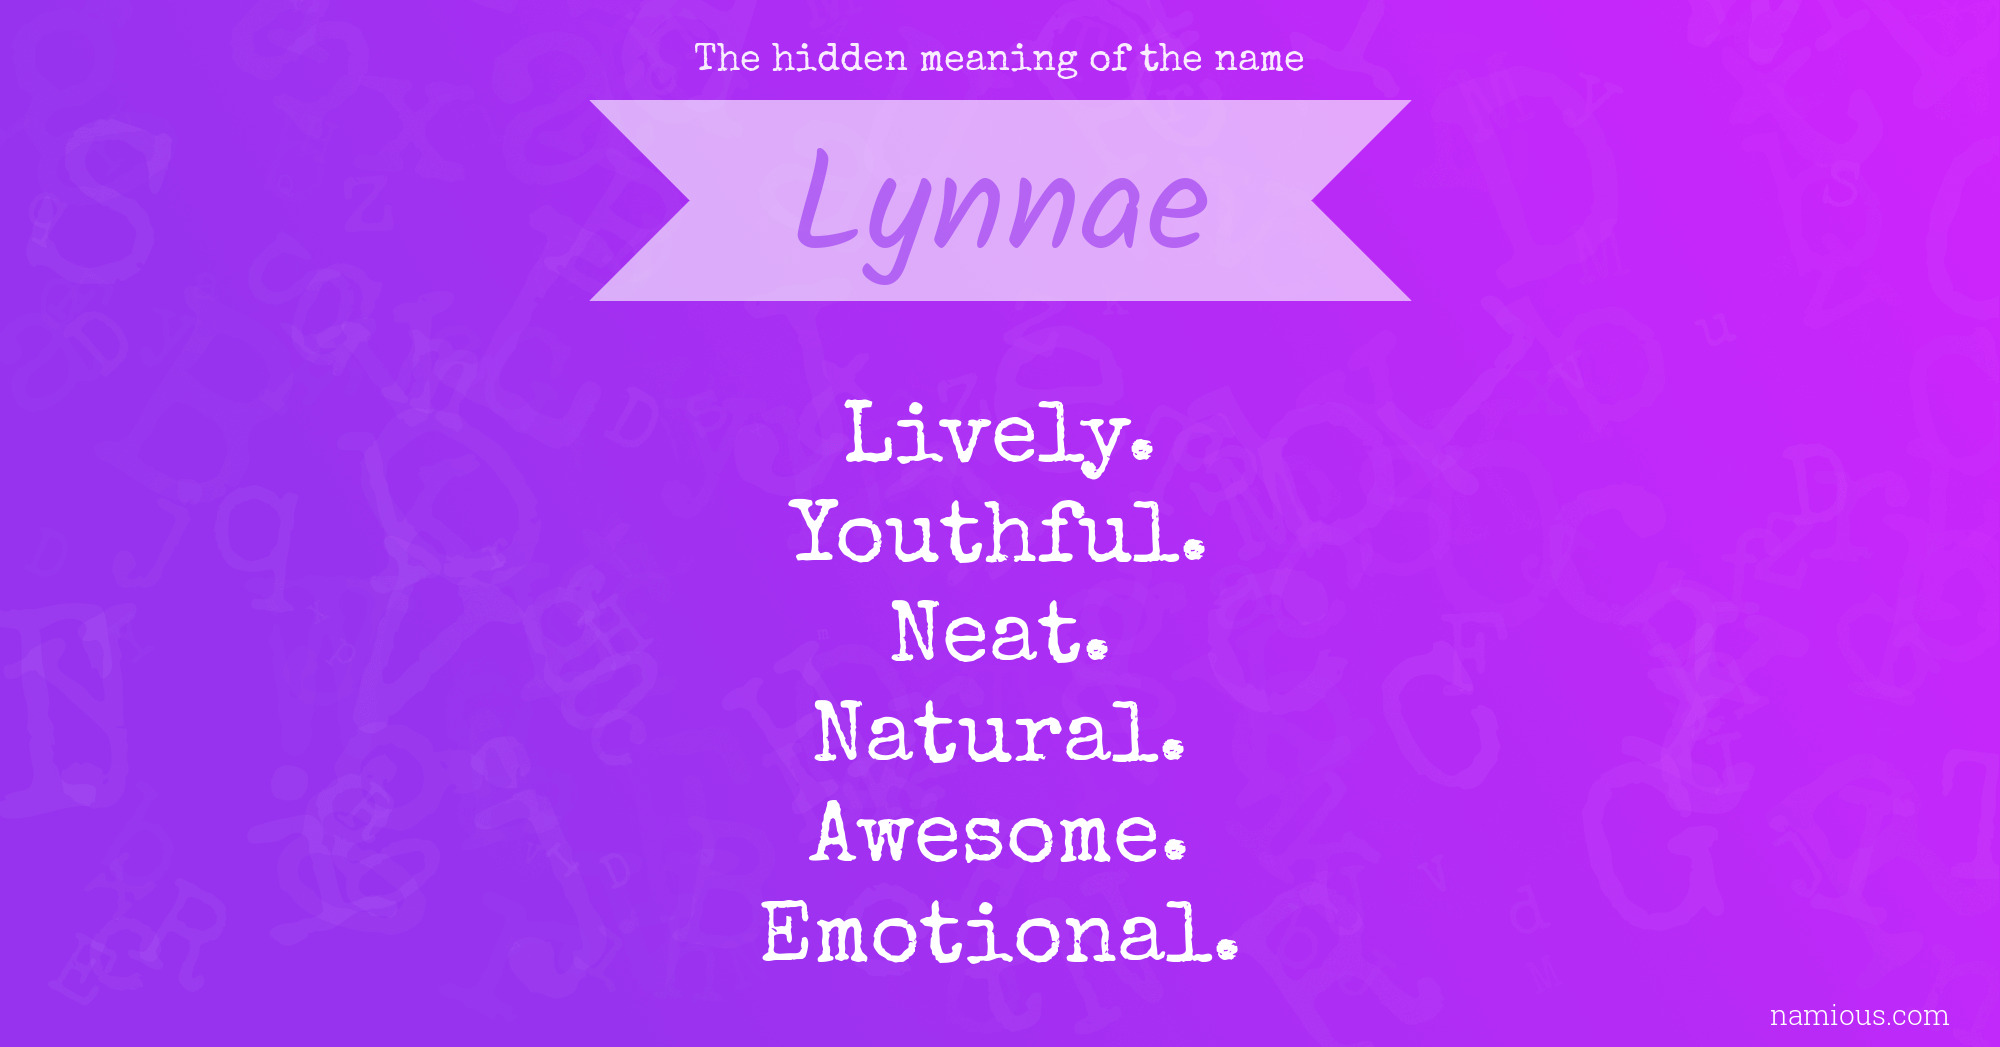 The hidden meaning of the name Lynnae